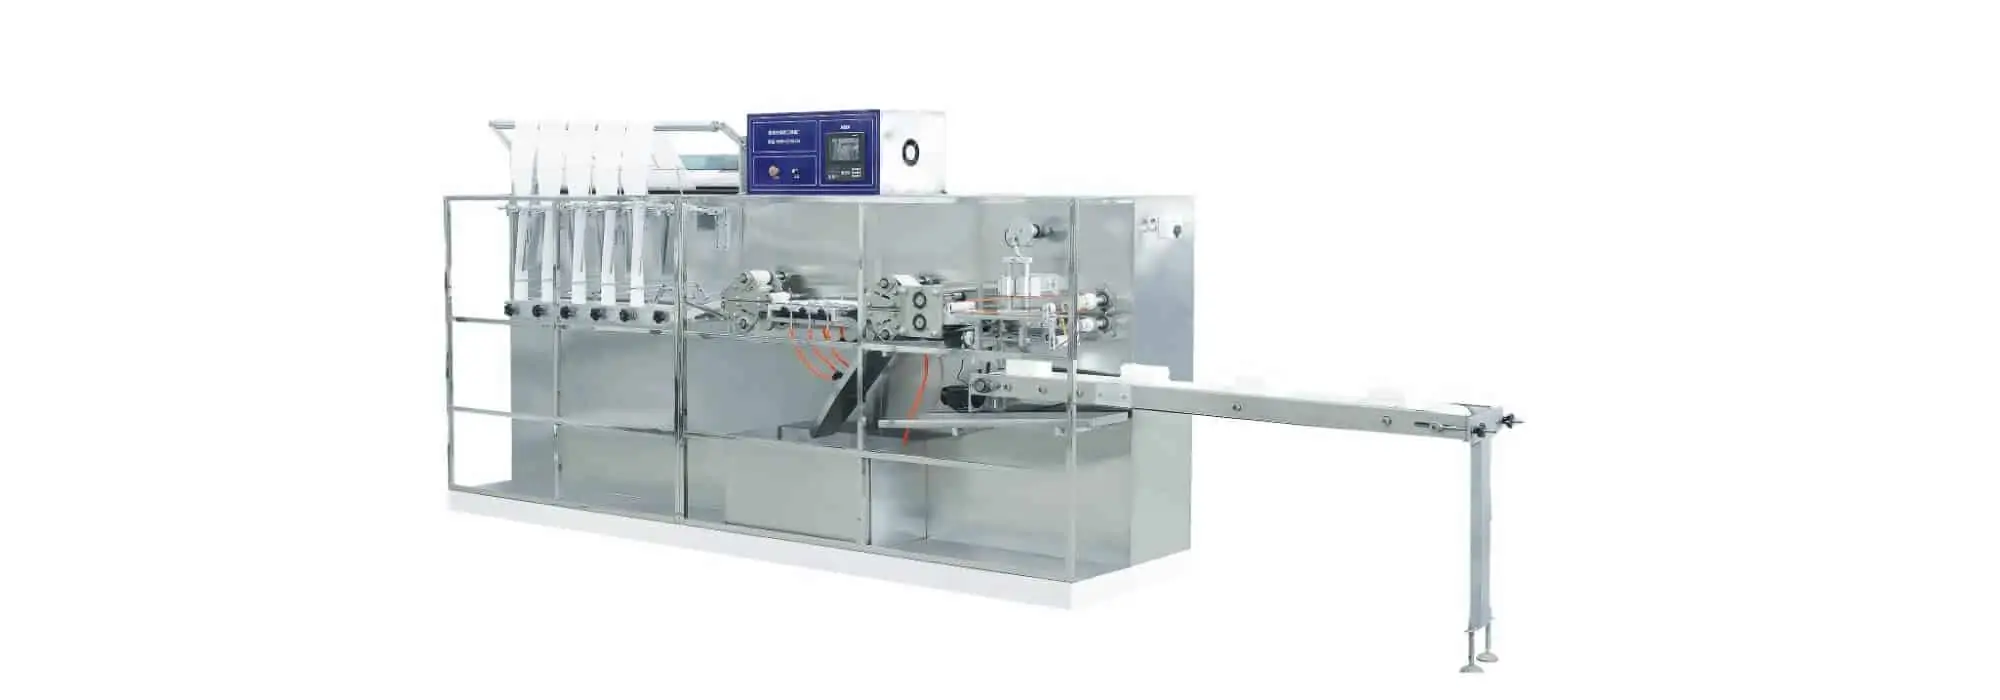 DH 6 wet wipes converting machine - DH-6 wet wipes converting machine (30-120pcs/pack)